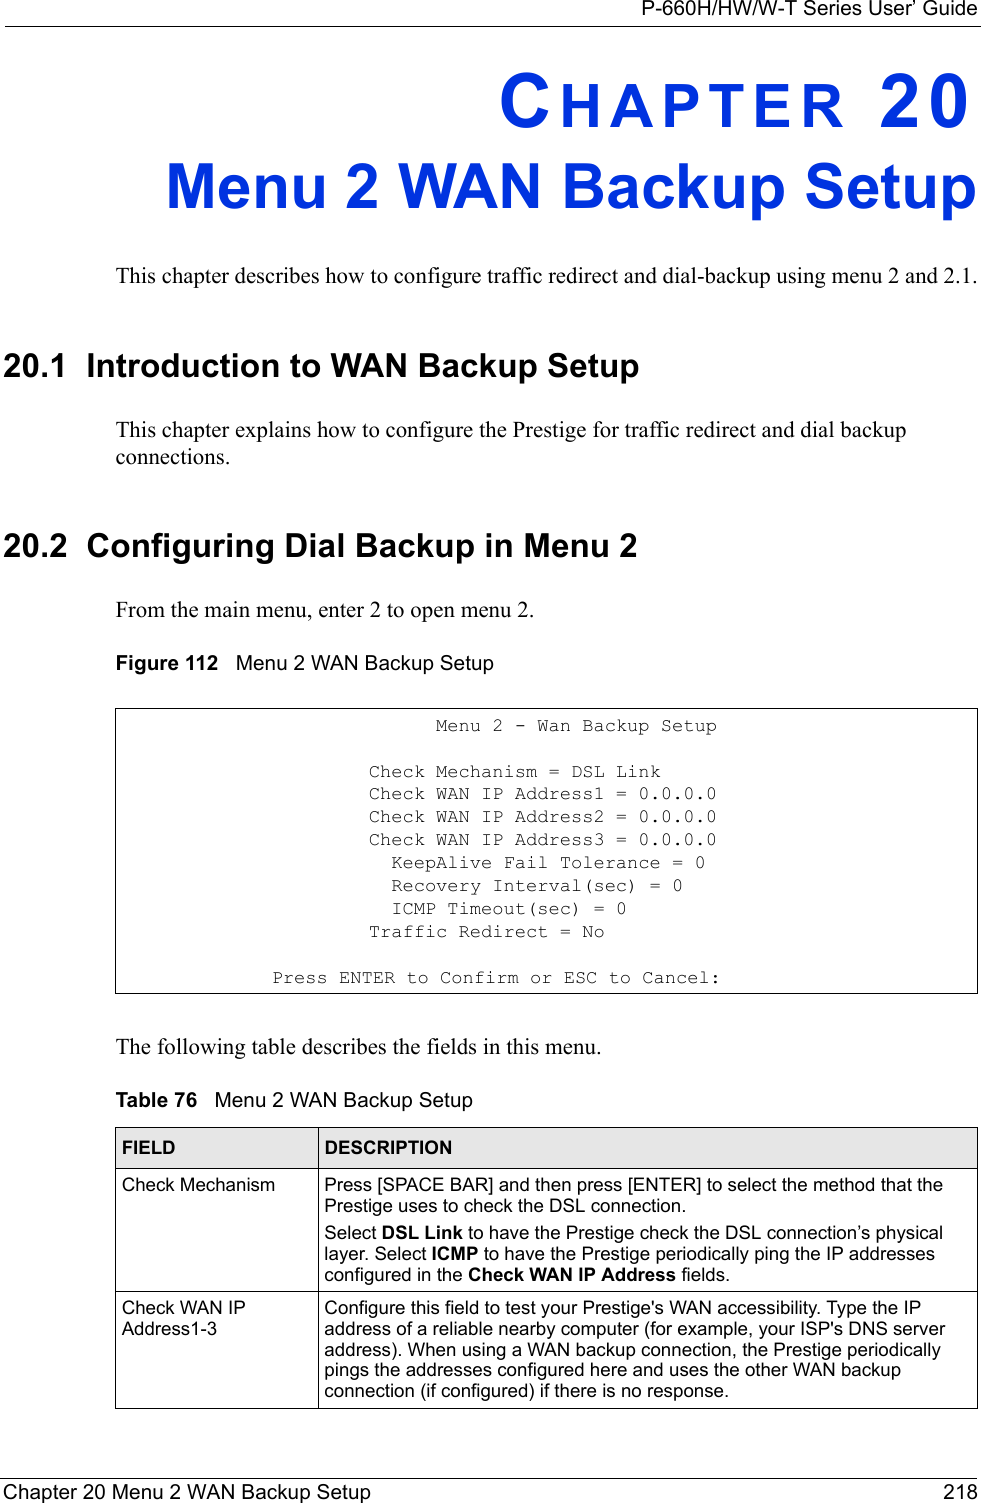 P-660H/HW/W-T Series User’ GuideChapter 20 Menu 2 WAN Backup Setup 218CHAPTER 20Menu 2 WAN Backup SetupThis chapter describes how to configure traffic redirect and dial-backup using menu 2 and 2.1.20.1  Introduction to WAN Backup SetupThis chapter explains how to configure the Prestige for traffic redirect and dial backup connections.20.2  Configuring Dial Backup in Menu 2From the main menu, enter 2 to open menu 2.Figure 112   Menu 2 WAN Backup SetupThe following table describes the fields in this menu.                            Menu 2 - Wan Backup Setup                      Check Mechanism = DSL Link                      Check WAN IP Address1 = 0.0.0.0                      Check WAN IP Address2 = 0.0.0.0                      Check WAN IP Address3 = 0.0.0.0                        KeepAlive Fail Tolerance = 0                        Recovery Interval(sec) = 0                        ICMP Timeout(sec) = 0                      Traffic Redirect = No              Press ENTER to Confirm or ESC to Cancel:Table 76   Menu 2 WAN Backup SetupFIELD DESCRIPTIONCheck Mechanism Press [SPACE BAR] and then press [ENTER] to select the method that the Prestige uses to check the DSL connection.Select DSL Link to have the Prestige check the DSL connection’s physical layer. Select ICMP to have the Prestige periodically ping the IP addresses configured in the Check WAN IP Address fields.Check WAN IP Address1-3Configure this field to test your Prestige&apos;s WAN accessibility. Type the IP address of a reliable nearby computer (for example, your ISP&apos;s DNS server address). When using a WAN backup connection, the Prestige periodically pings the addresses configured here and uses the other WAN backup connection (if configured) if there is no response.